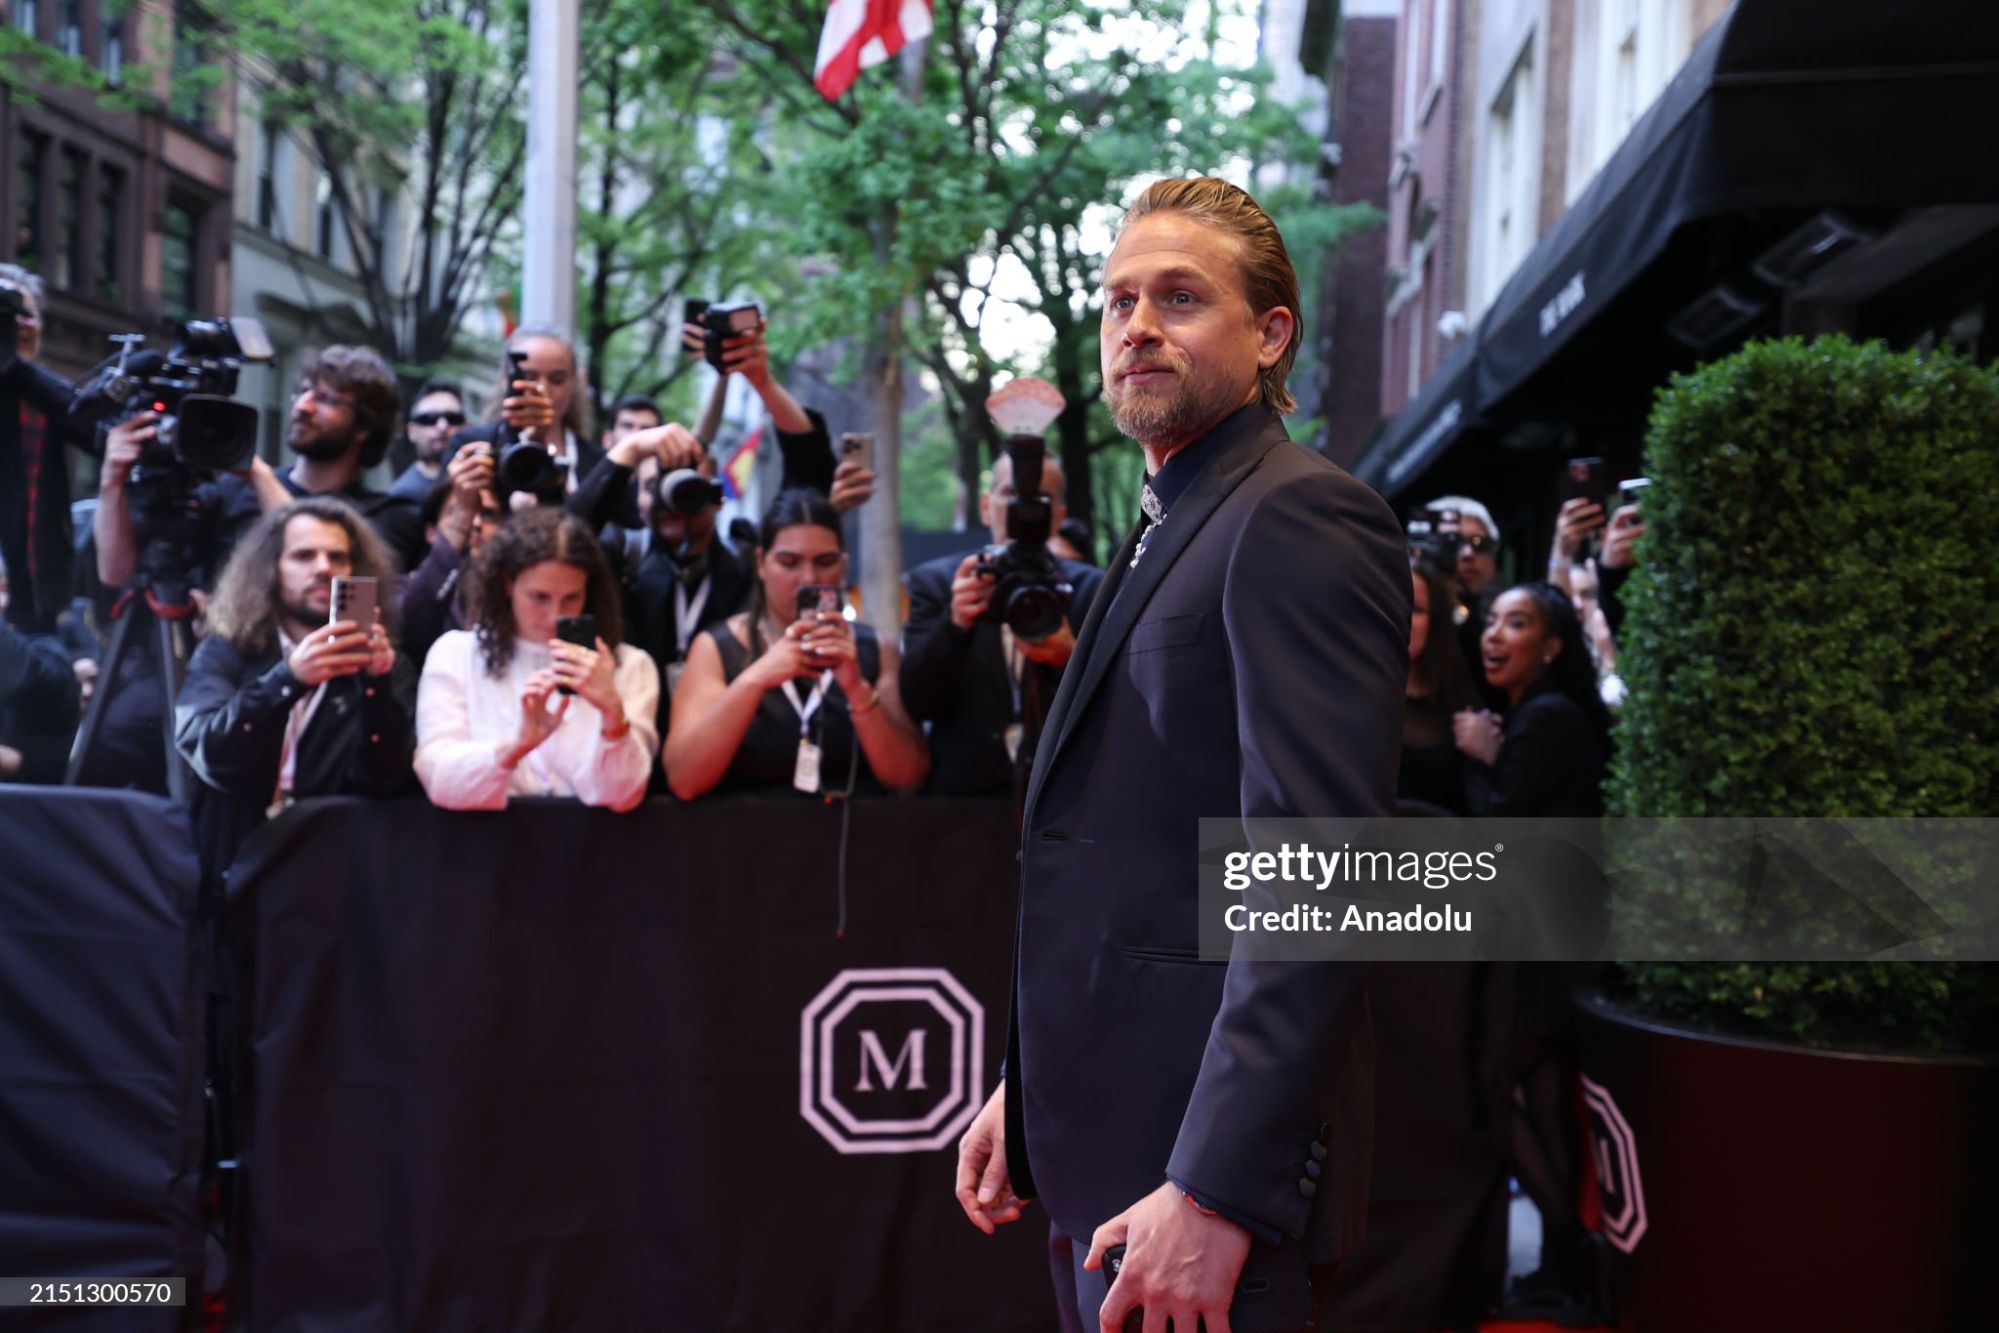 gettyimages-2151300570-2048x2048.jpg